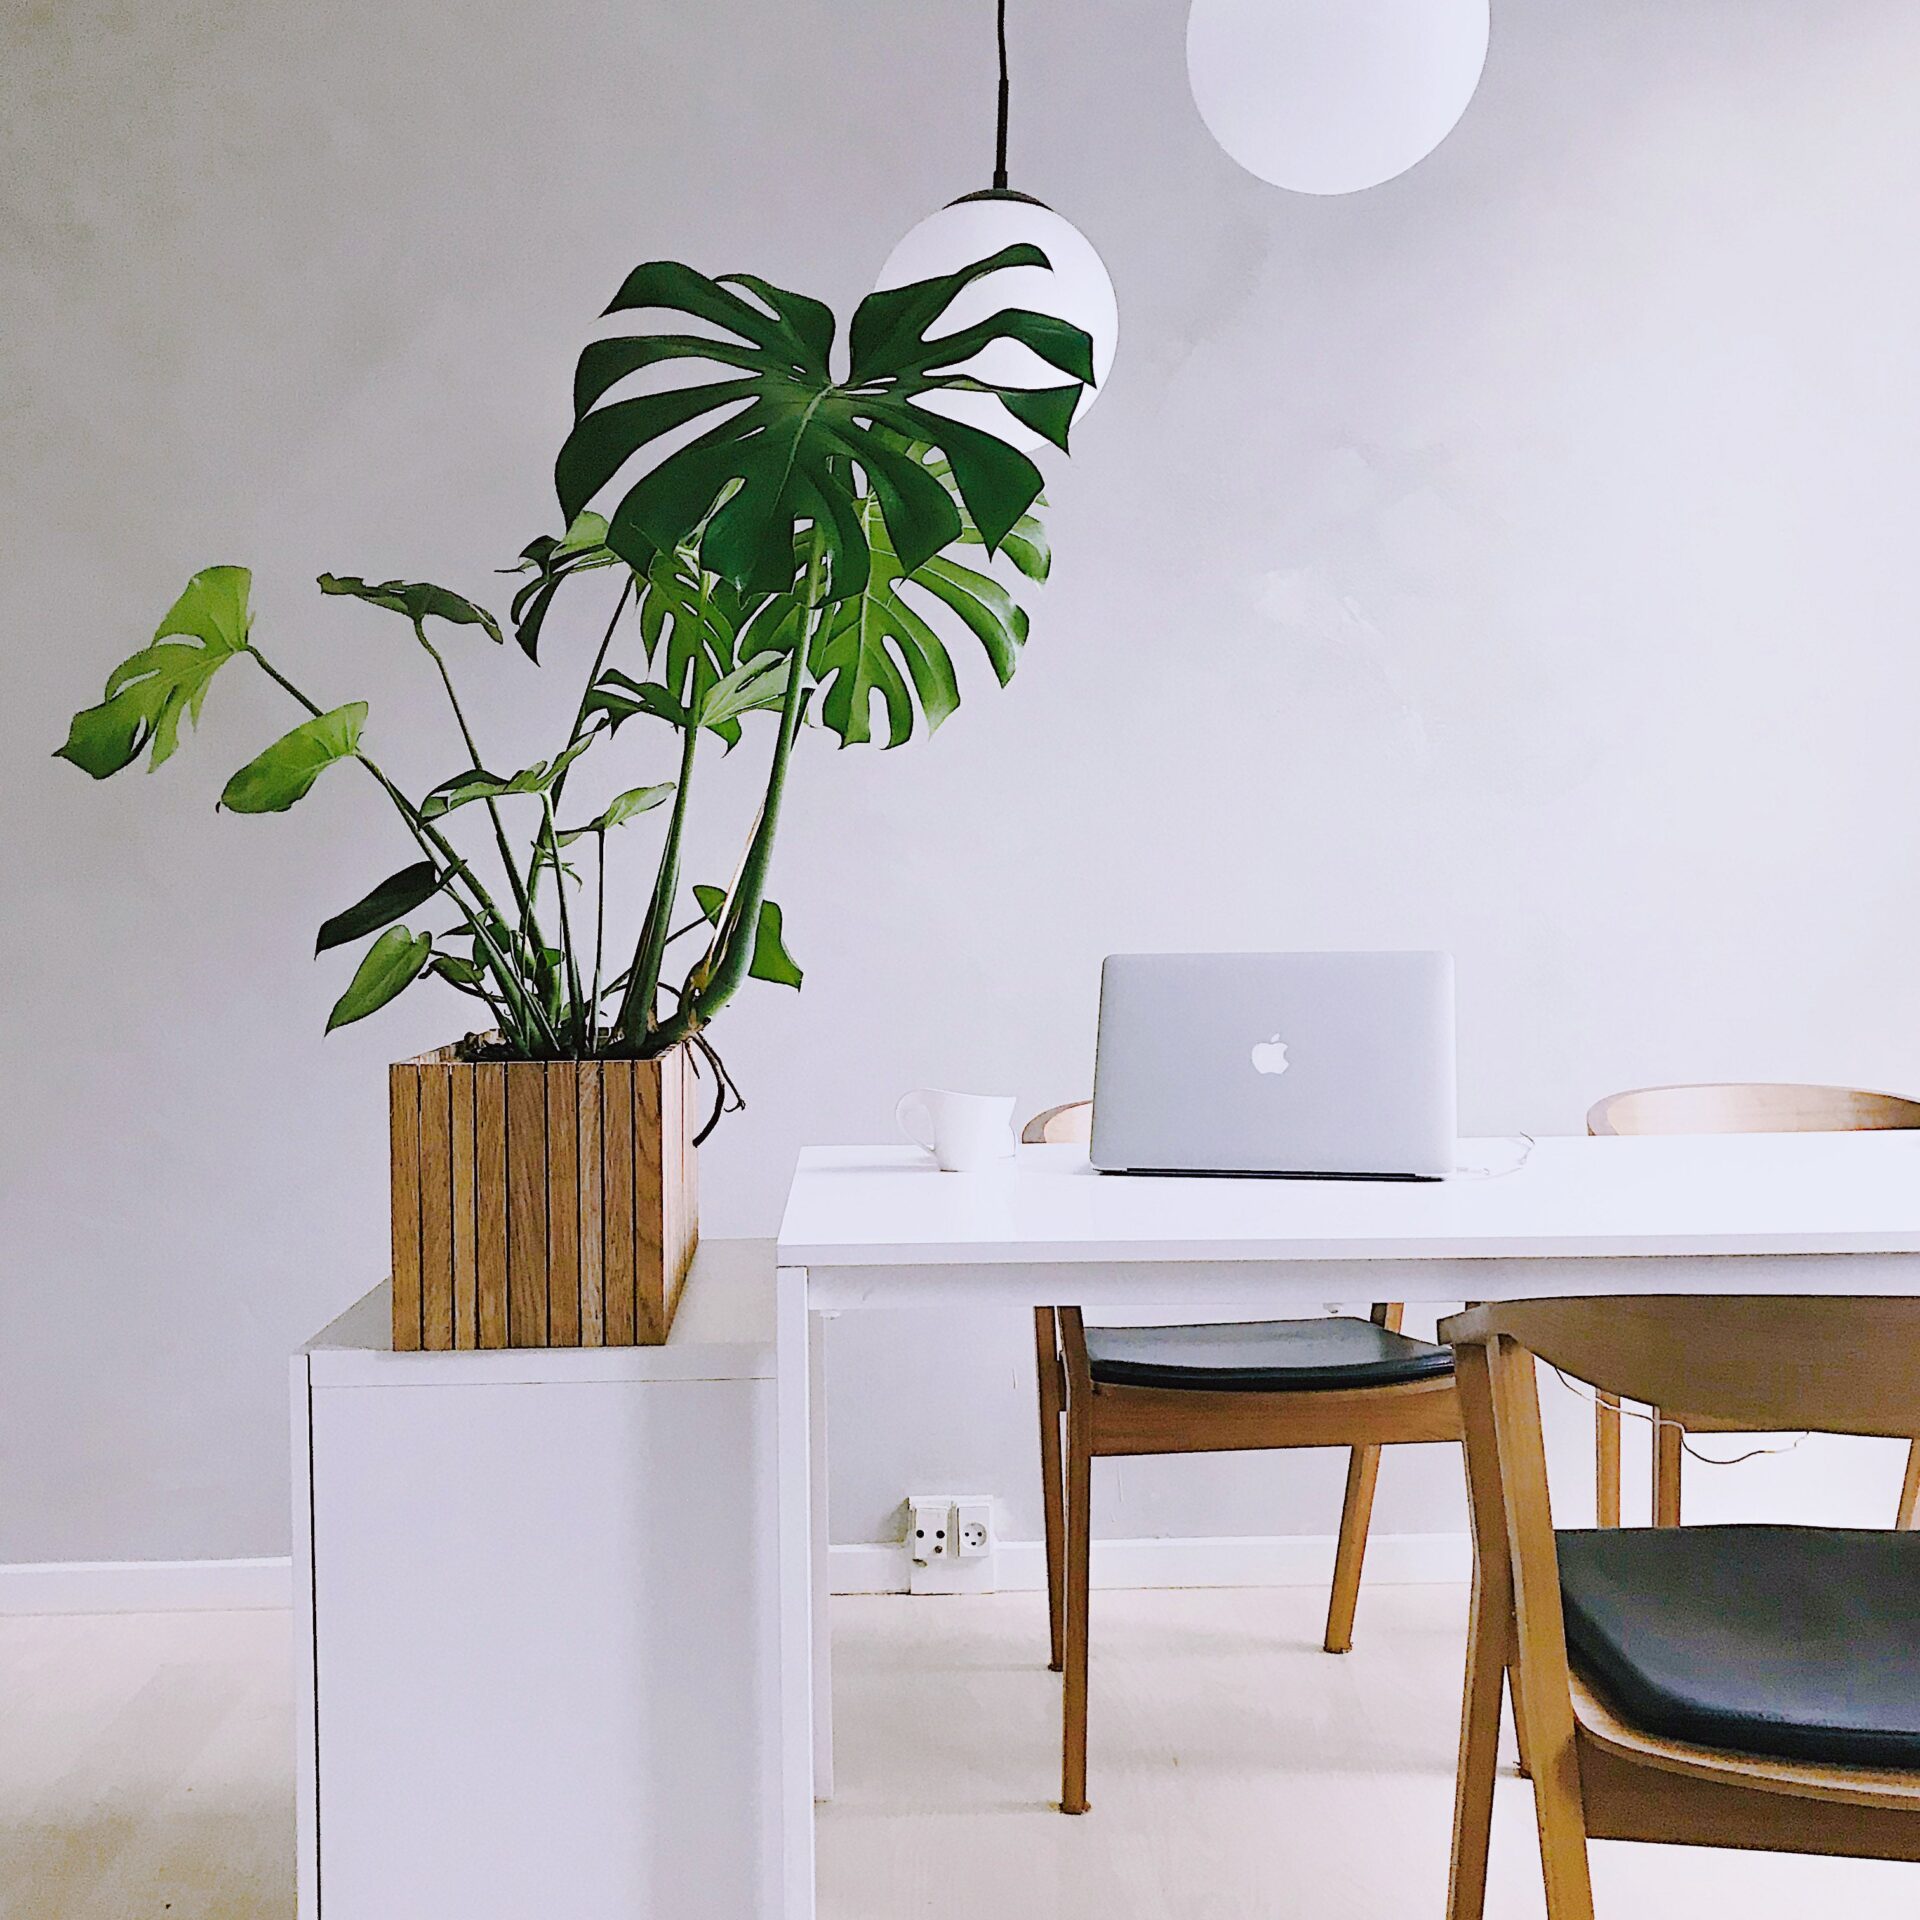 Squarely reolkumme med plante